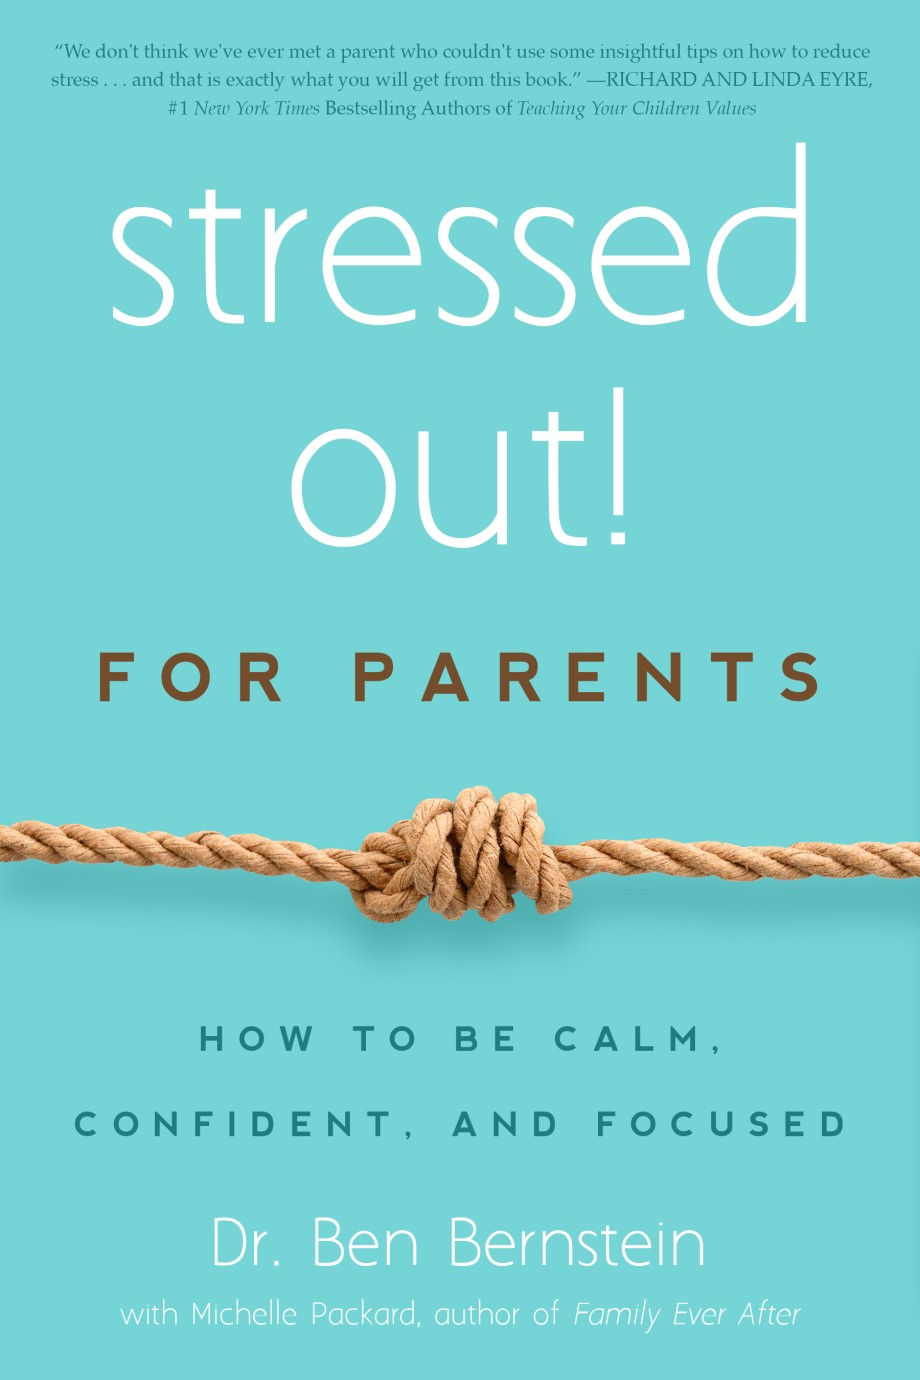 Stressed Out! For Parents How to Be Calm, Confident & Focused